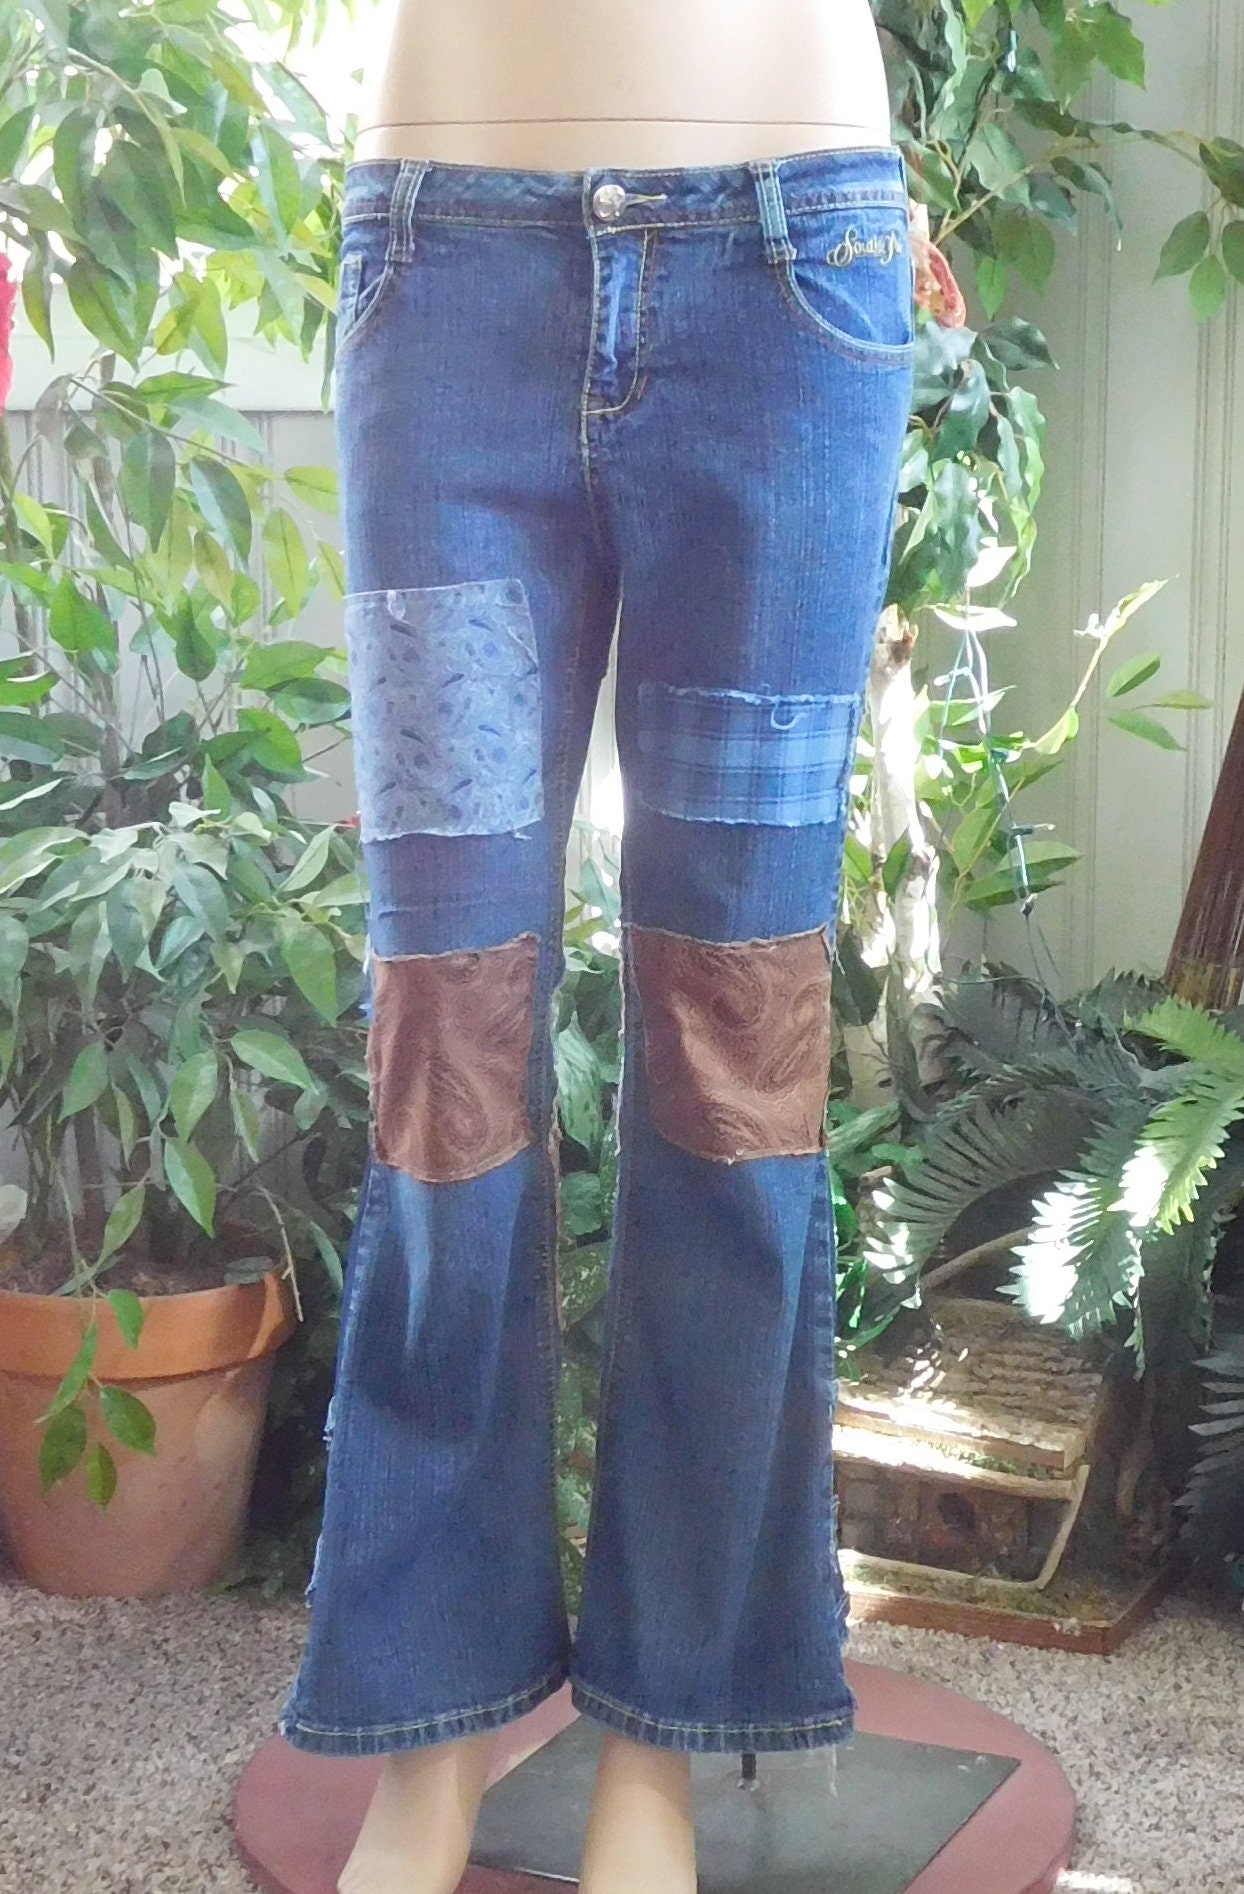 Bell Bottom Jeans for Women Flare Distressed Patchwork Denim | Etsy